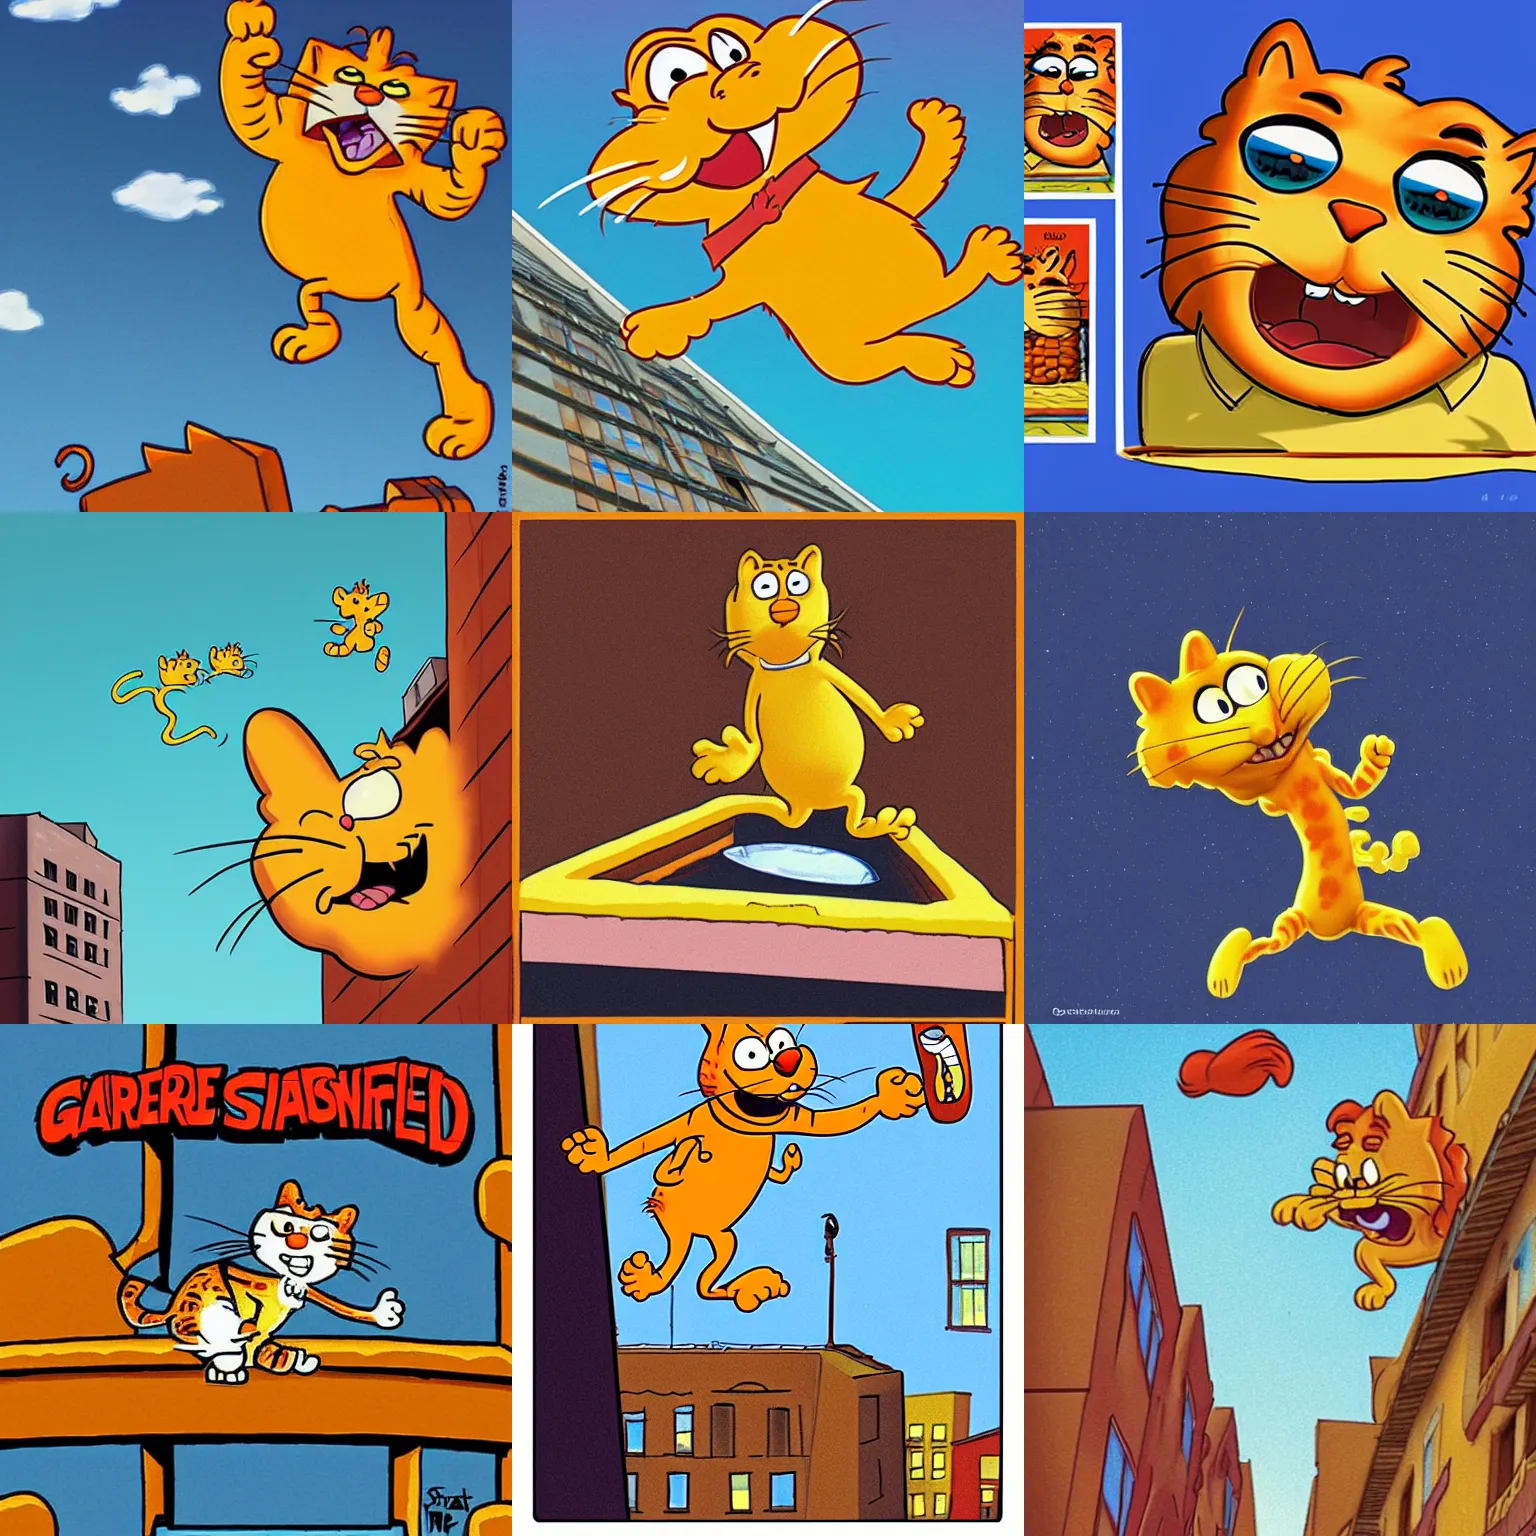 Prompt: “Garfield the cartoon cat jumping from a tall building while screaming where’s my lasagna, illustrated by Pixar”